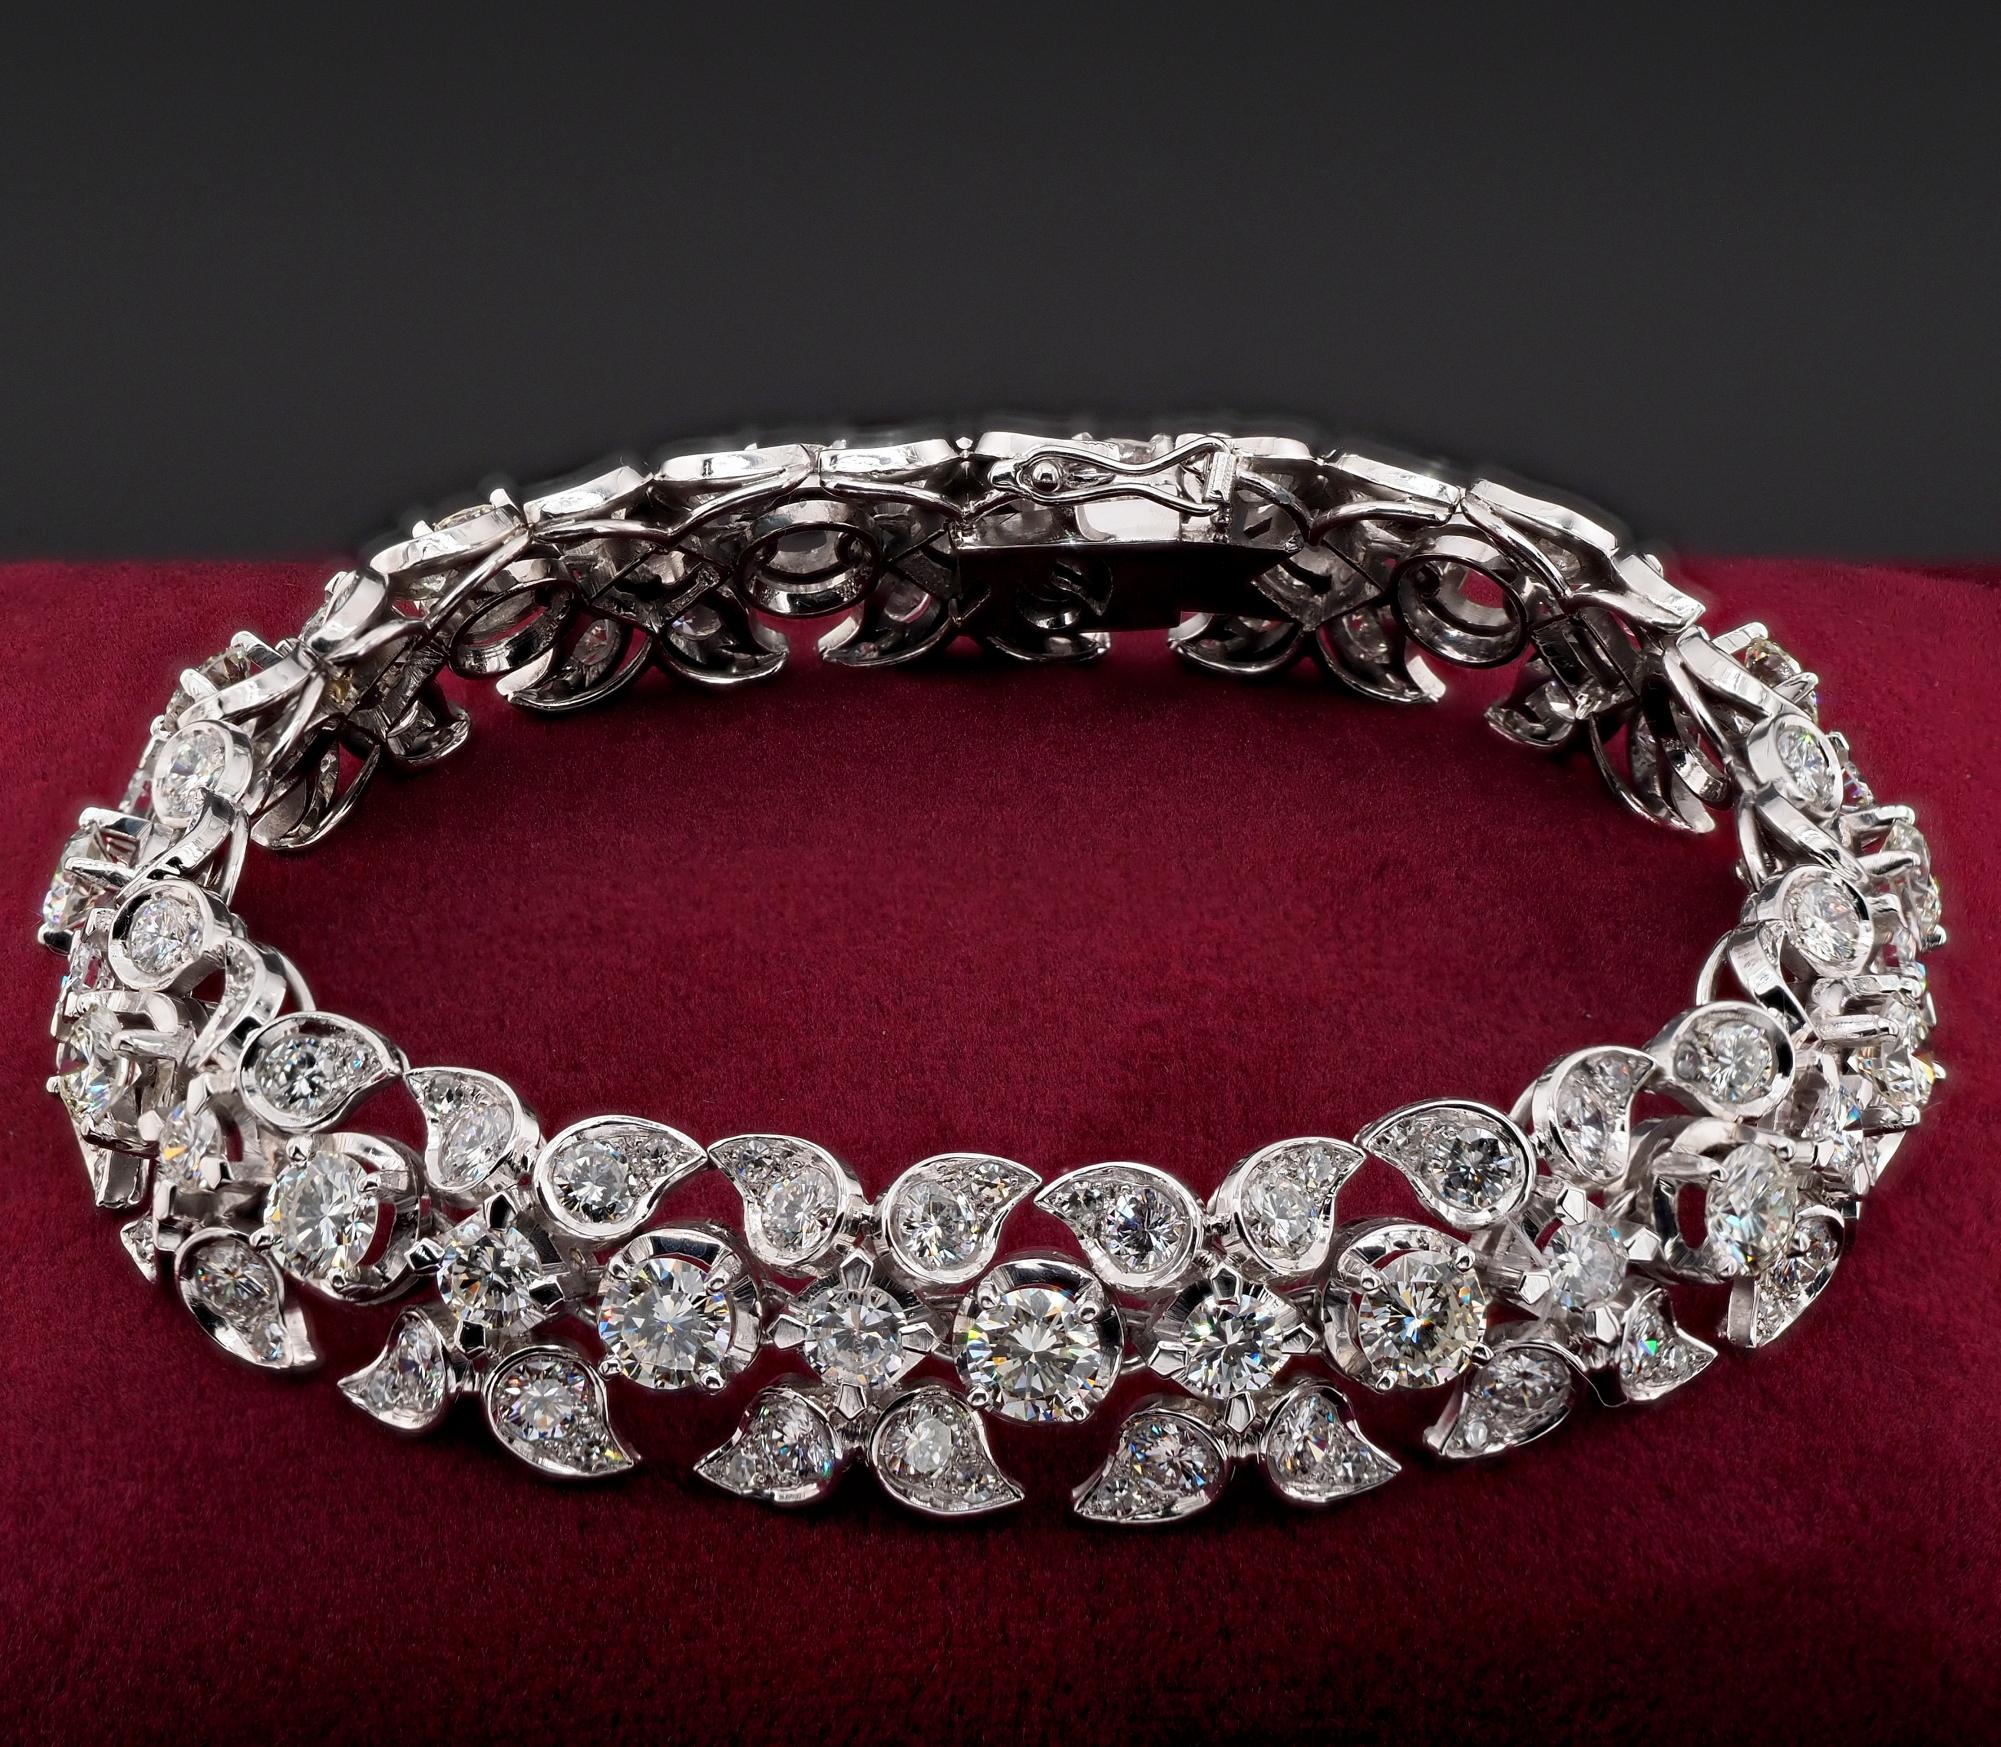 Timeless Diamond Glamour
Evoking the glamour and the elegance of the 50’s, this dazzling vintage bracelet possess all the charm of the timeless high end jewellery, wearable and magnificent
1950 ca, hand crafted in gleaming Platinum, marvellous